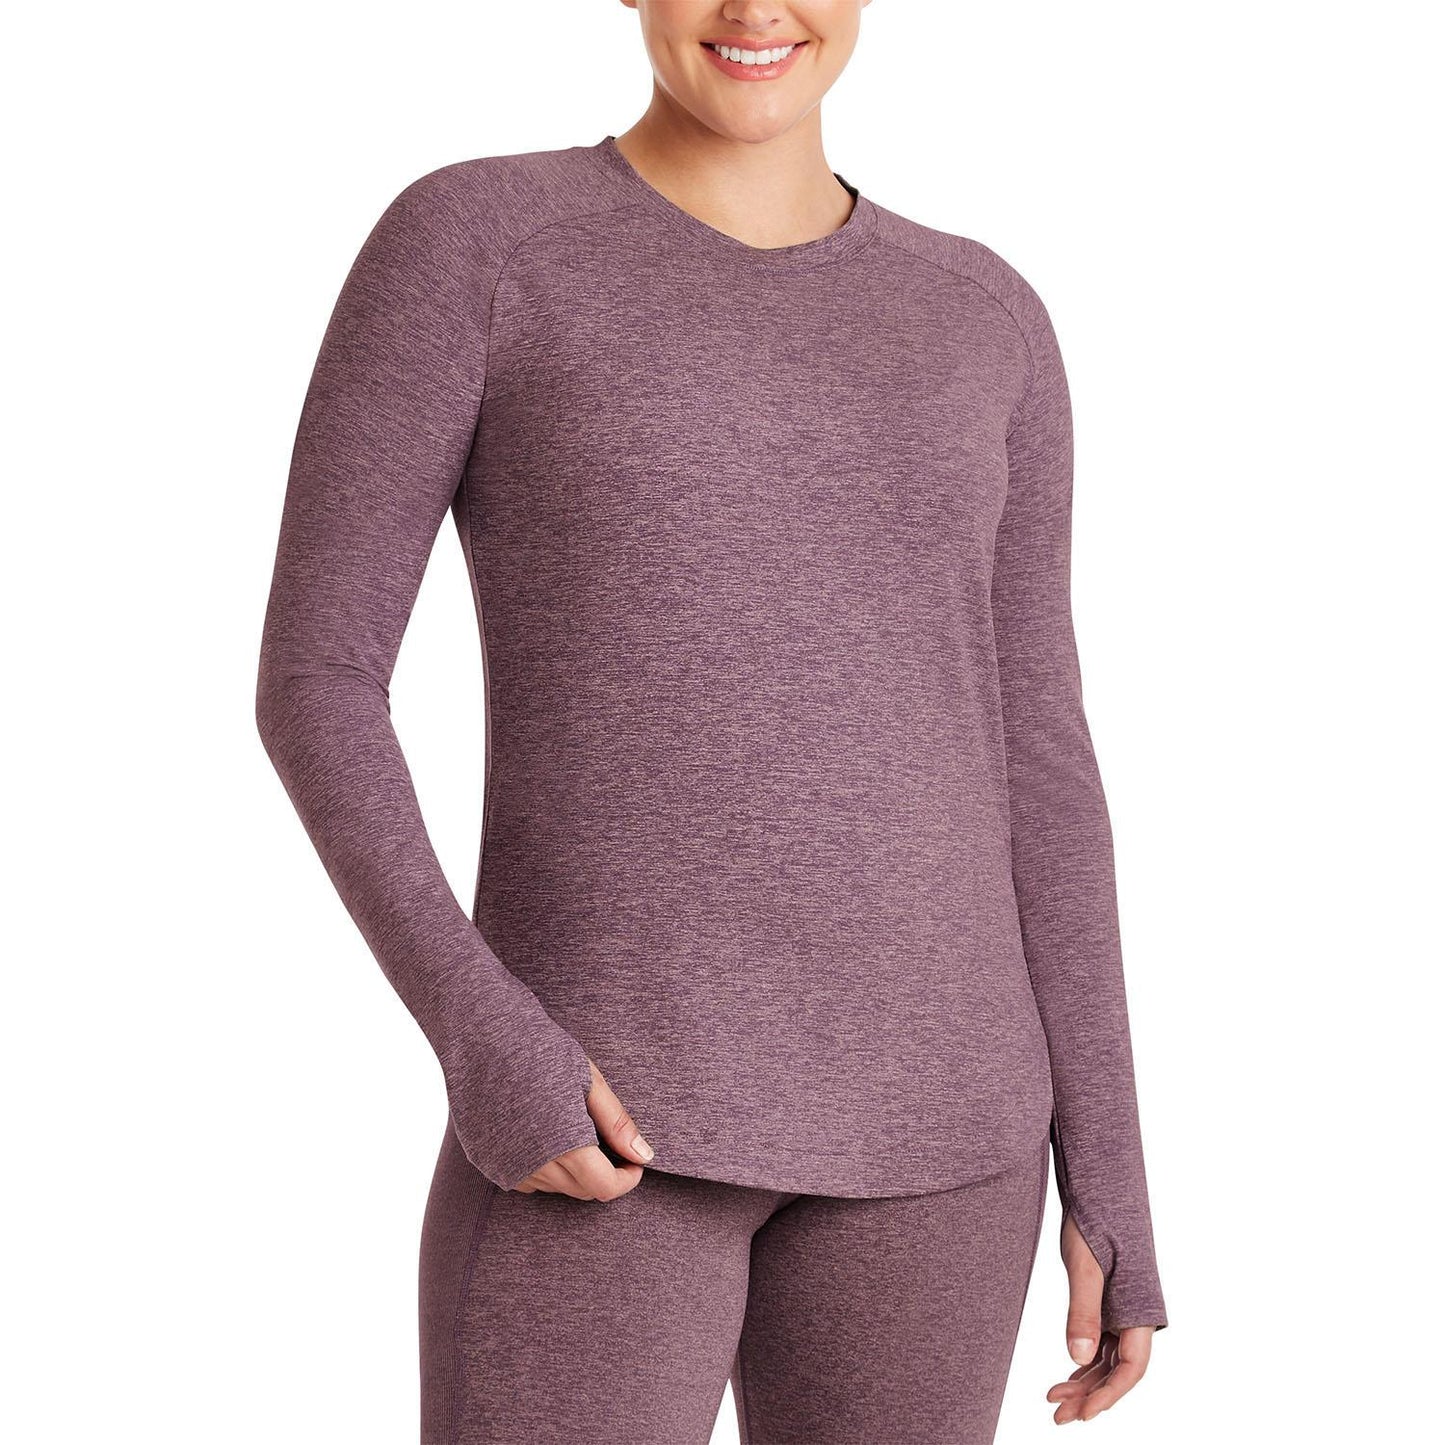 Member's Mark Women's Curved Hem Long Sleeve Soft Heather Top with Thumbholes